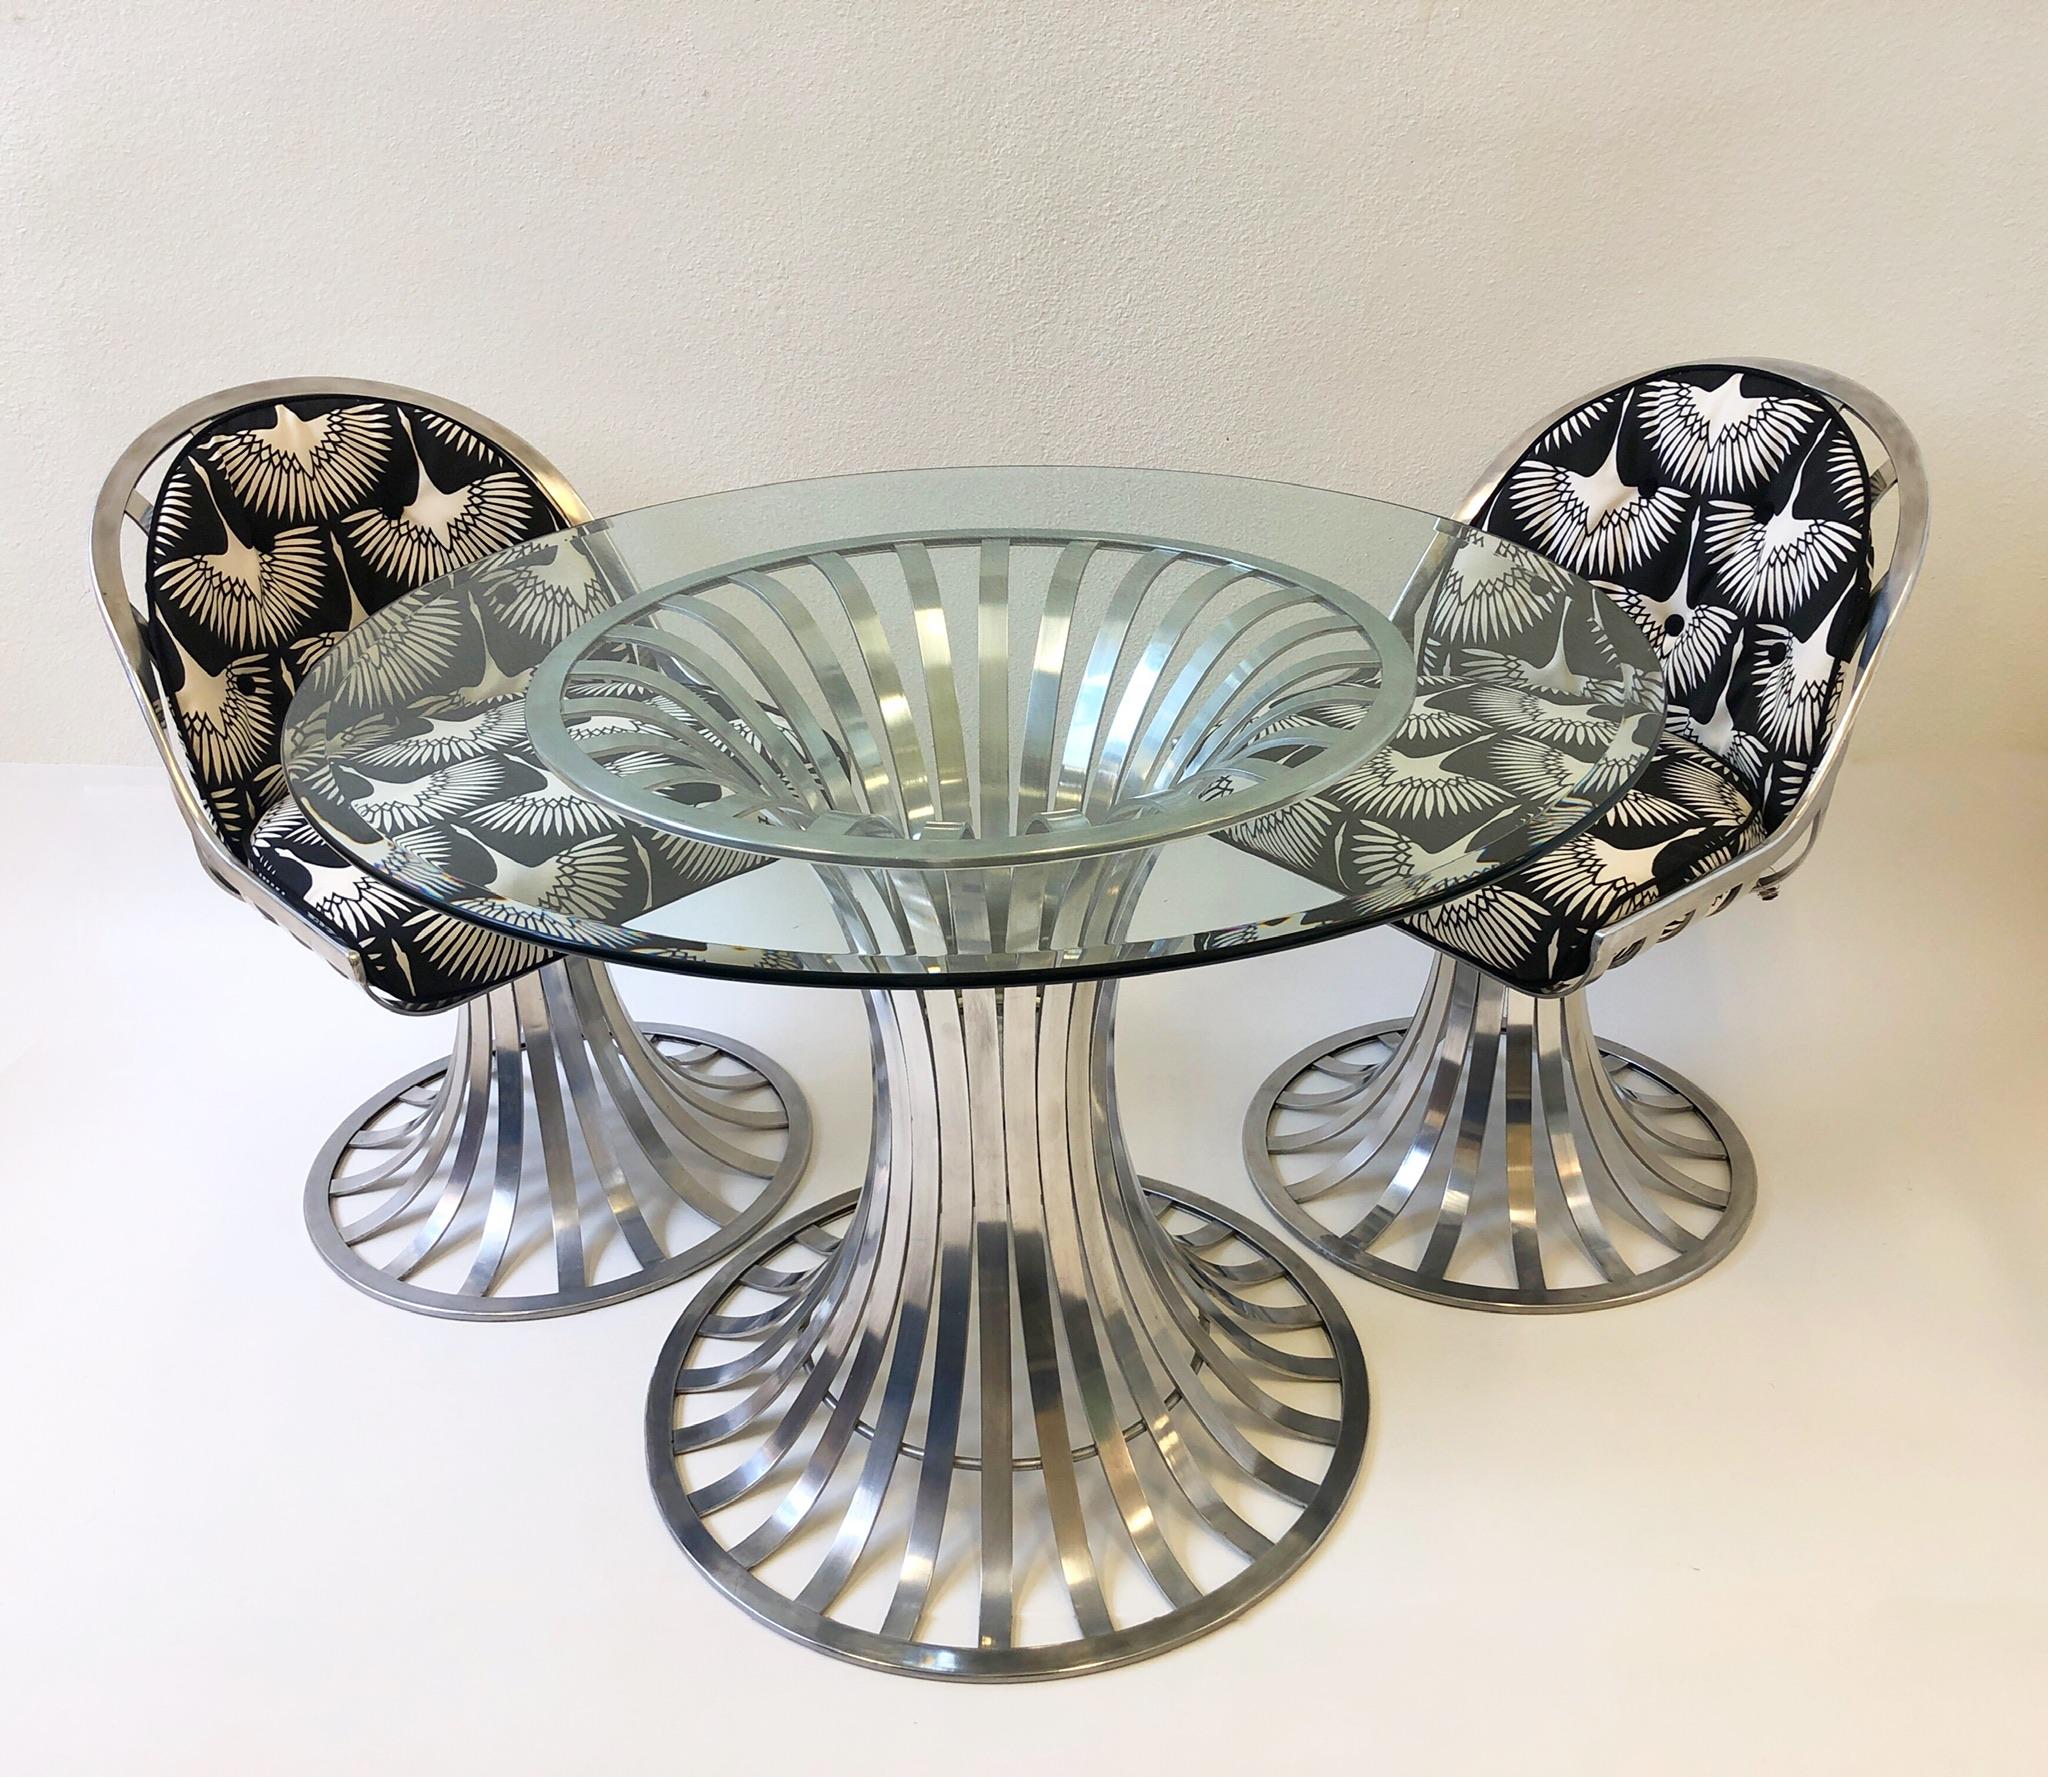 Aluminum patio set designed by Russell Woodard. The set consists of four swivel chairs newly recovered in a Sunbrella fabric with flying cranes designed. The table has a new 48” diameter 1/2” thick glass top. The frames are in original condition, so